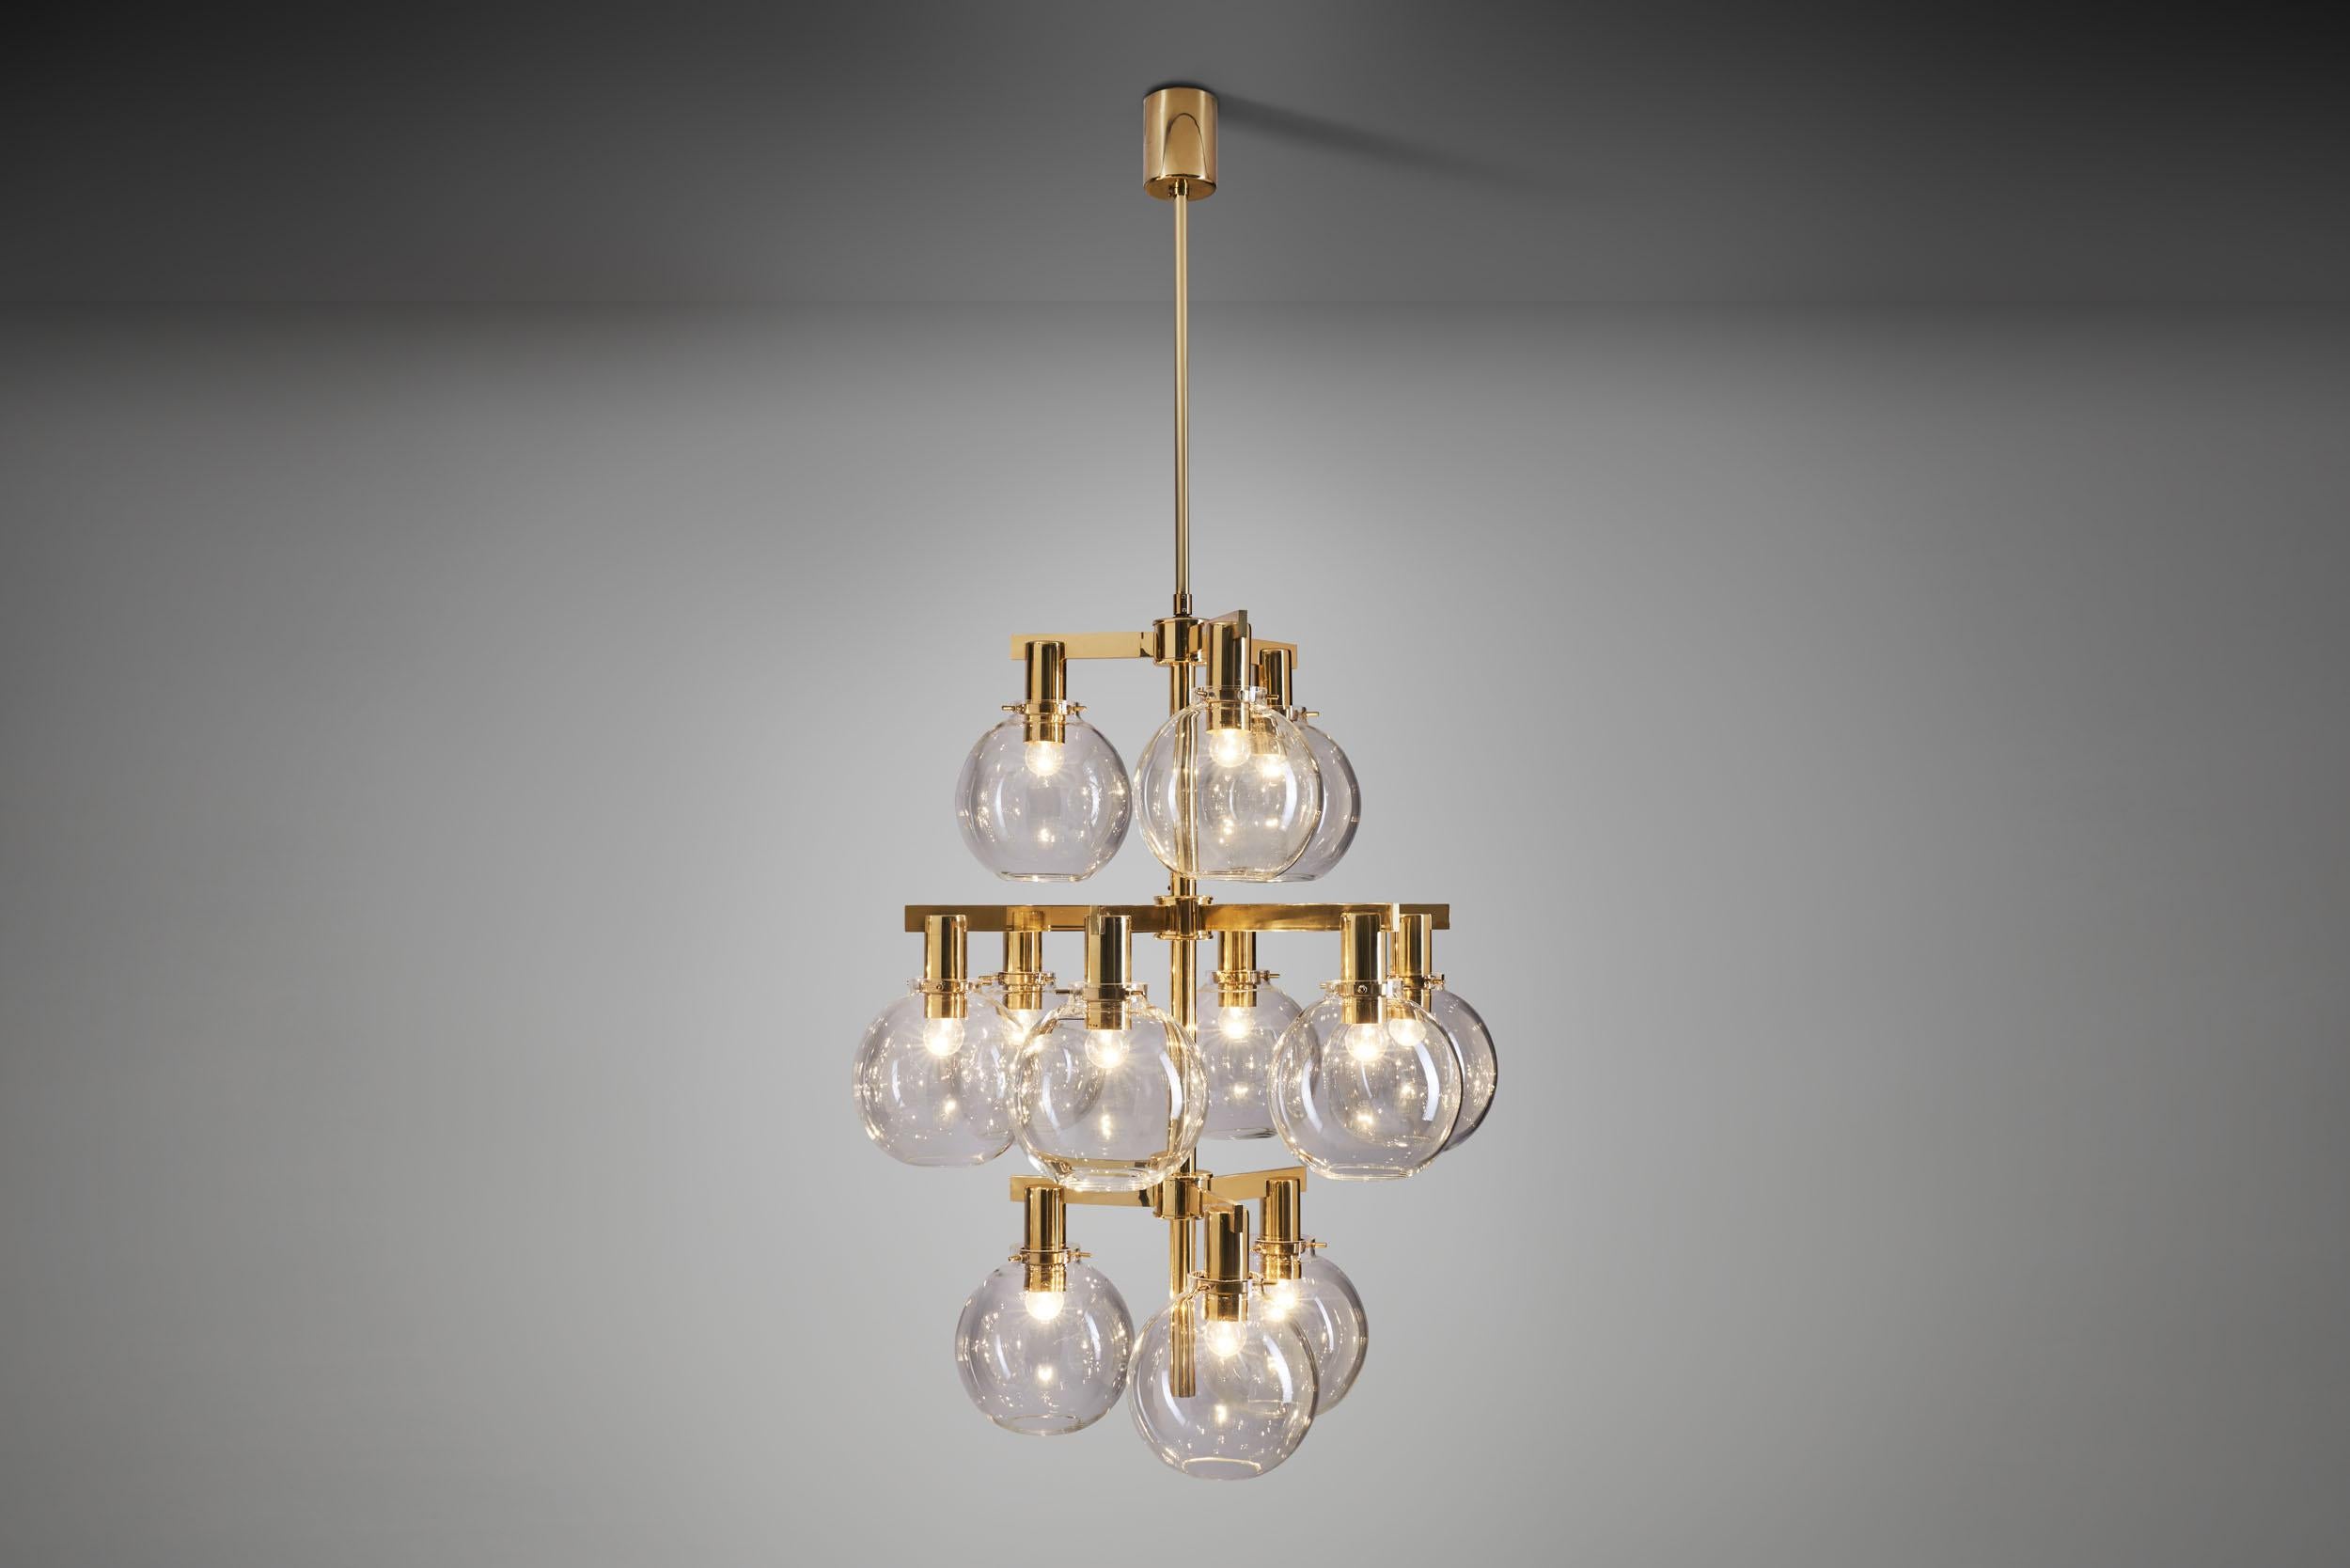 This marvellous pastoral chandelier is among the most recognizable Swedish lighting designs of the mid-century era. With a brass frame holding 12 smoked, translucent glass shades, this model has become synonymous with Hans Agne Jakobsson’s design